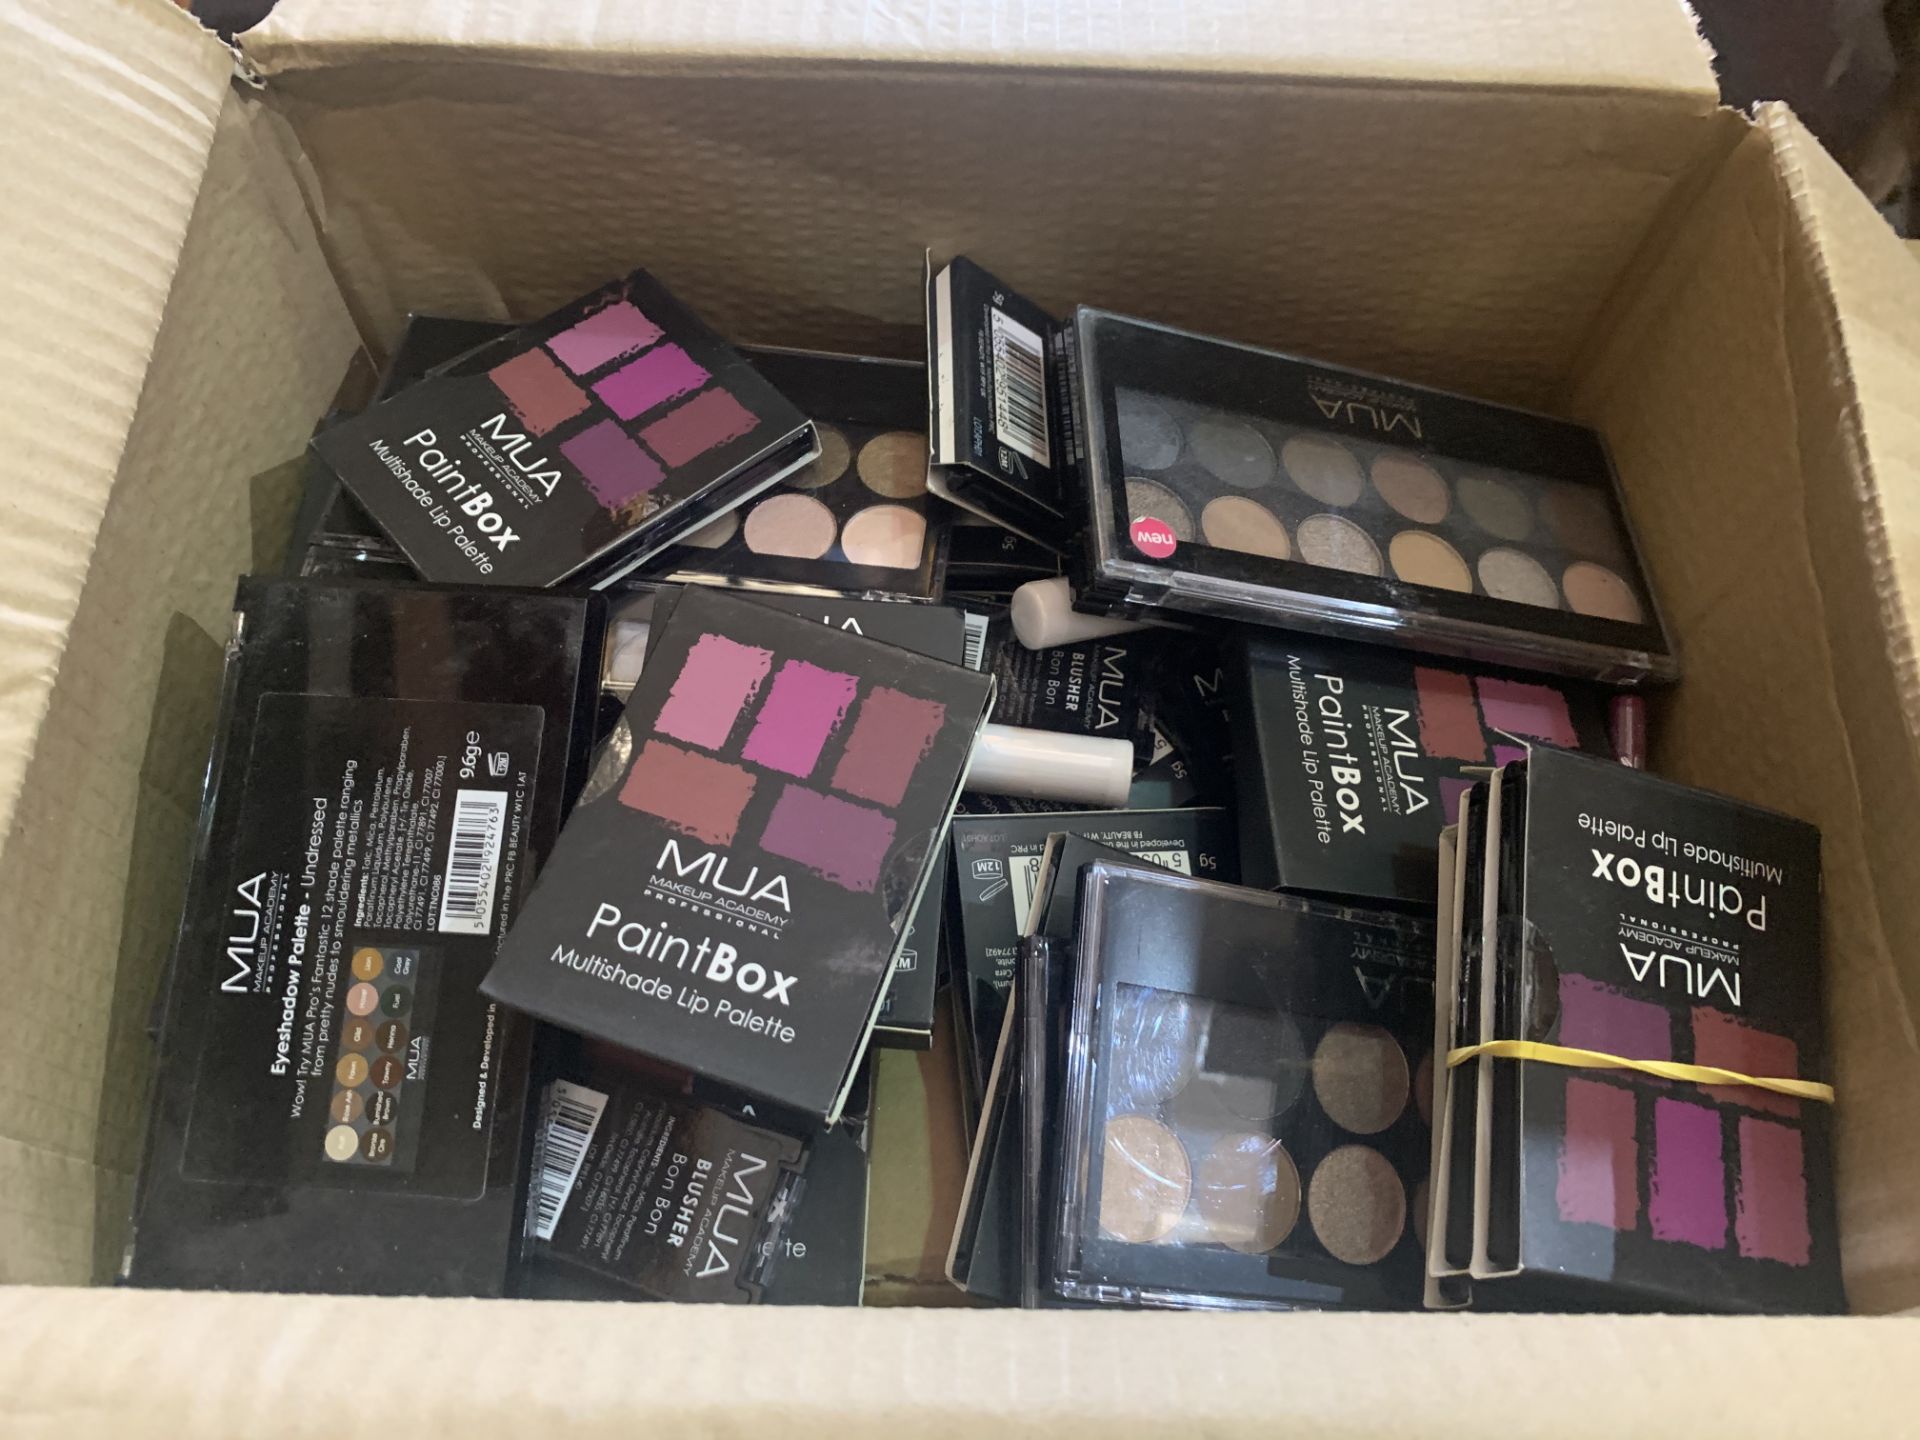 COSMETIC LOT CONTAINING APPROX 200 VARIOUS PIECES OF MAKE - UP IN 1 BOX